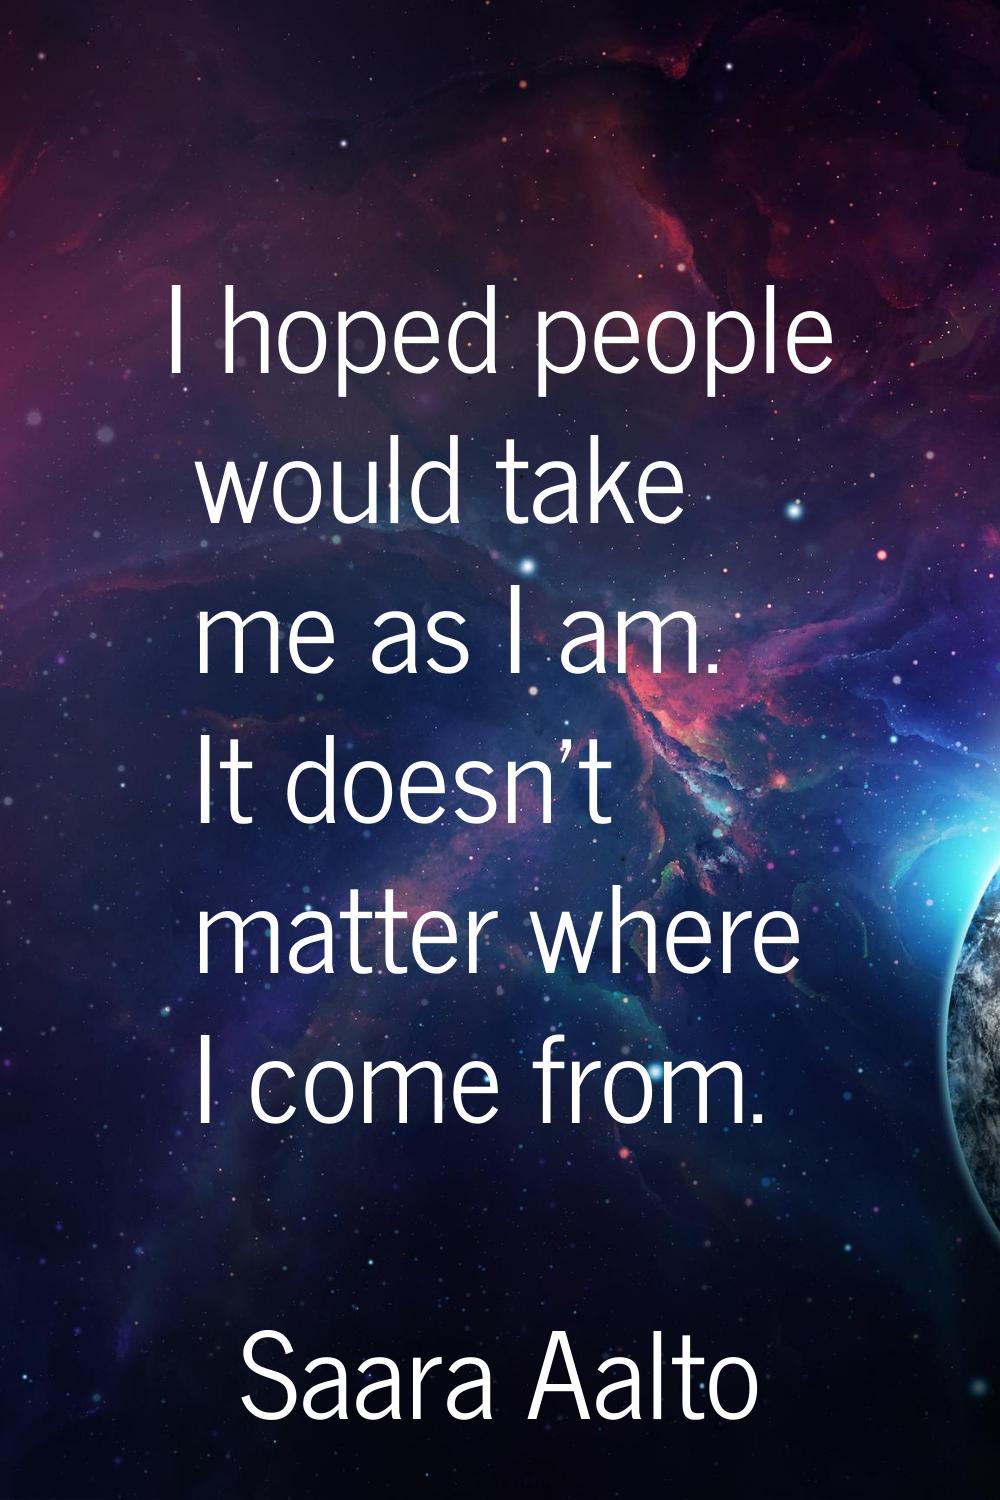 I hoped people would take me as I am. It doesn't matter where I come from.